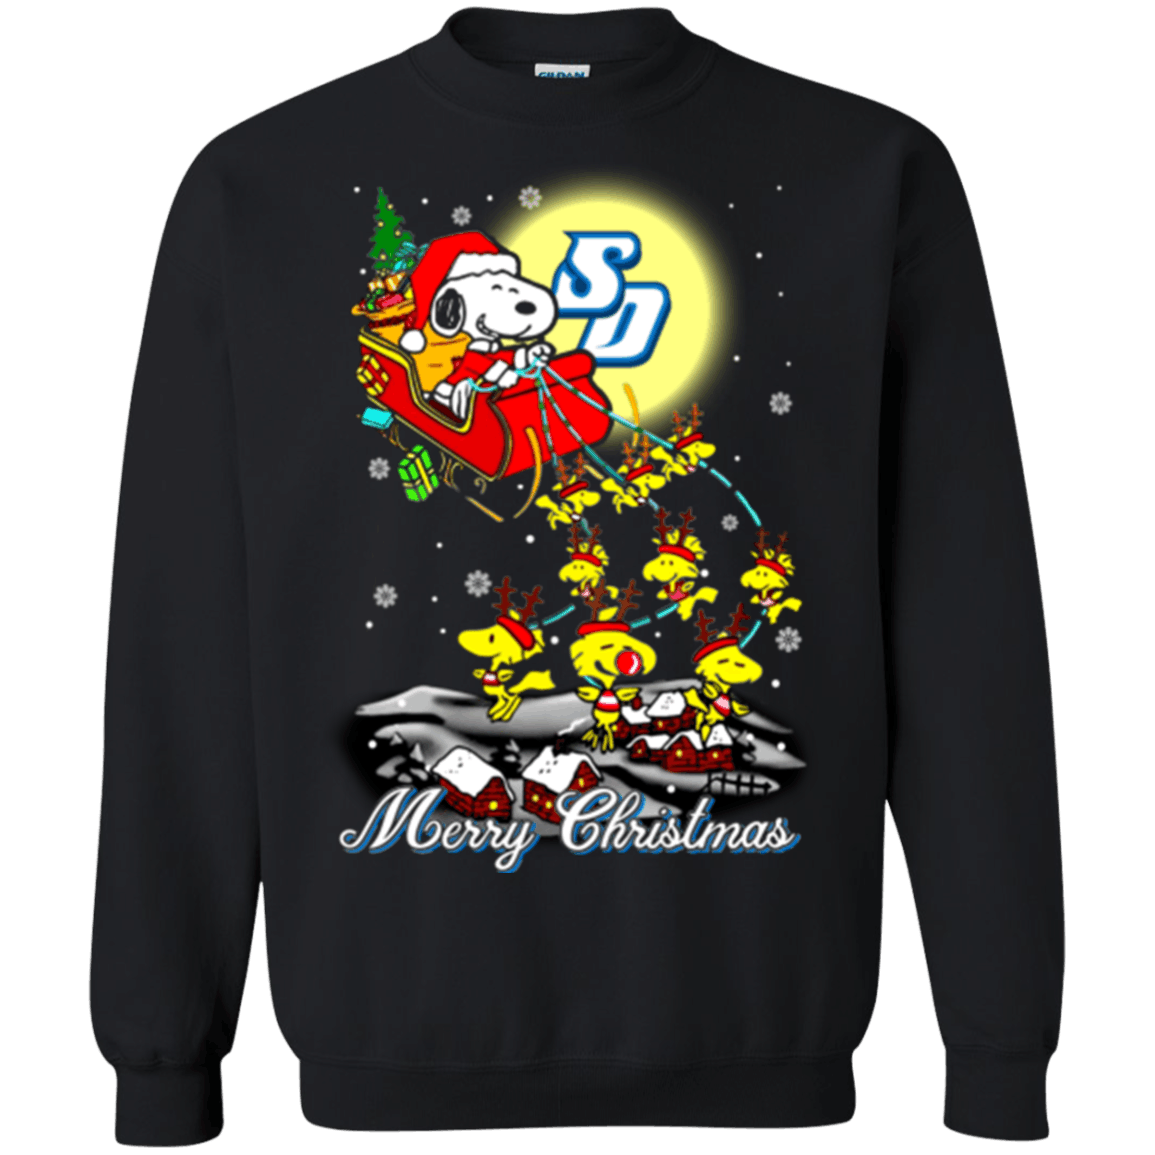 Fabulous San Diego Toreros Ugly Christmas Sweater 2023S Santa Claus With Sleigh And Snoopy Sweatshirts